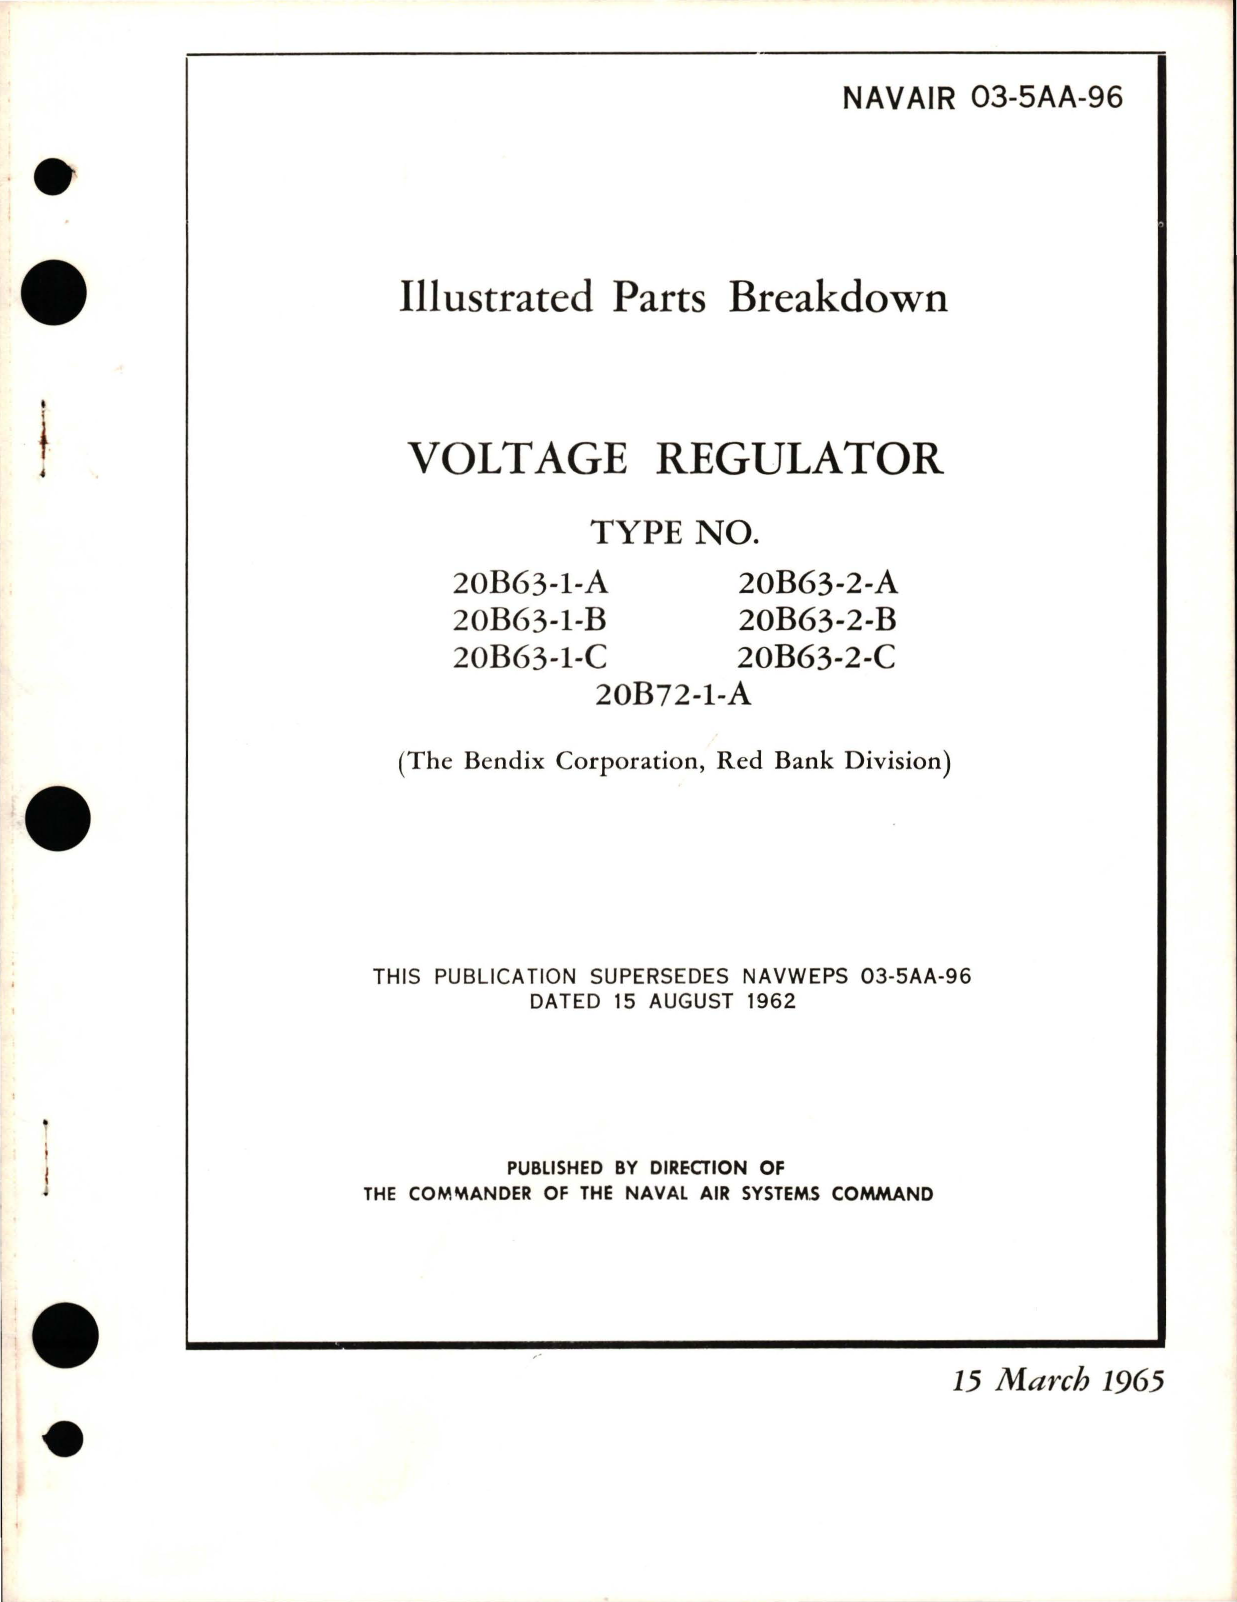 Sample page 1 from AirCorps Library document: Illustrated Parts Breakdown for Voltage Regulator - Types 20B63-1-A. 20B63-1-B, 20B63-1-C, 20B63-2-A, 20B63-2-B, 20B63-2-C, 20B72-1-A 